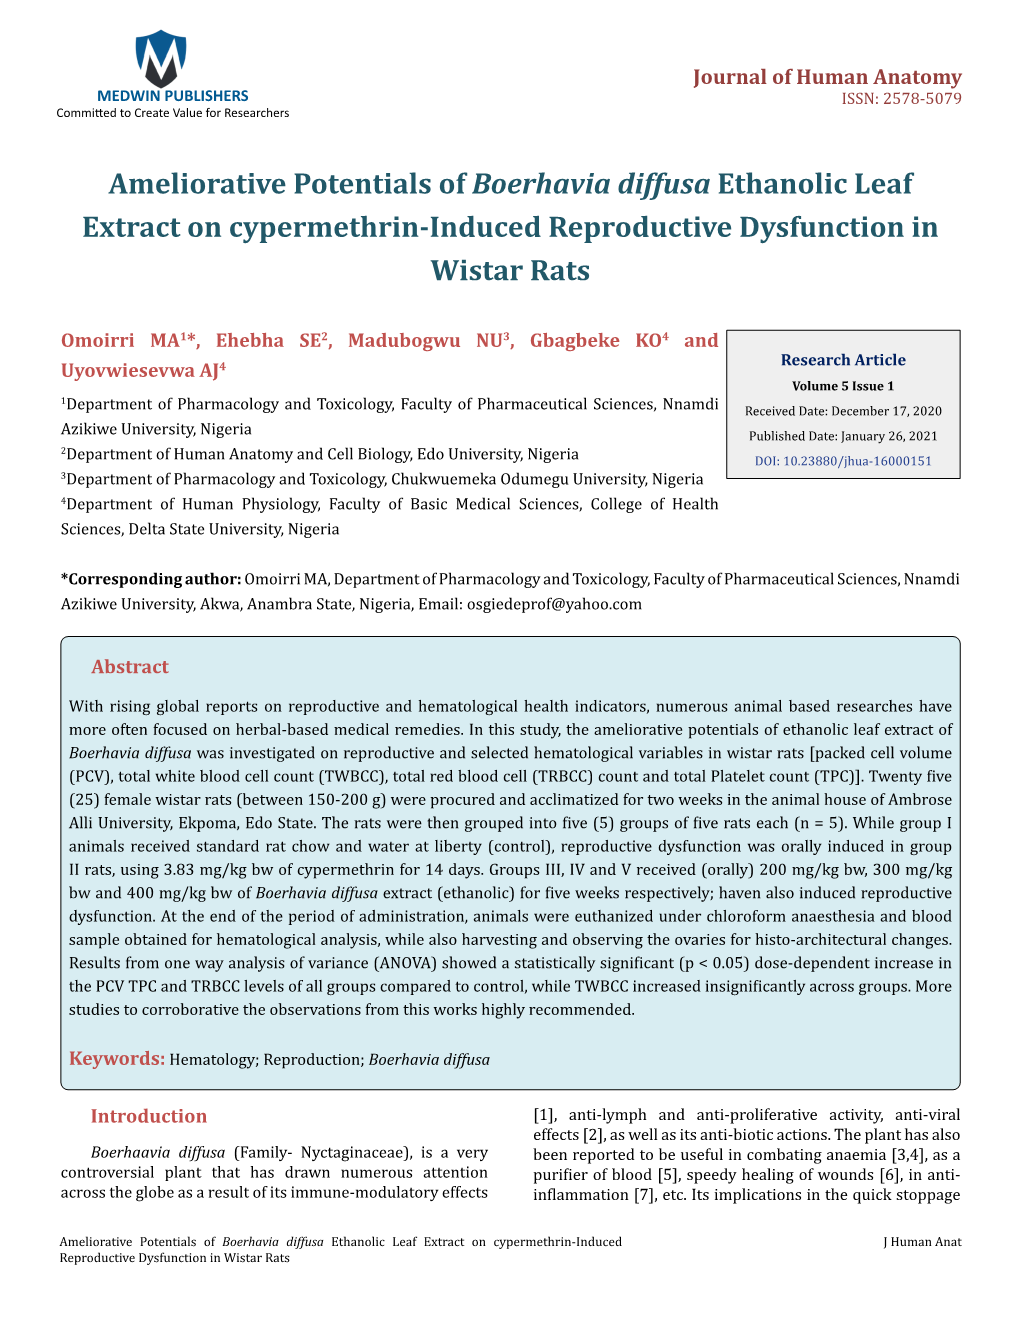 Ameliorative Potentials of Boerhavia Diffusa Ethanolic Leaf Extract on Cypermethrin-Induced Reproductive Dysfunction in Wistar Rats